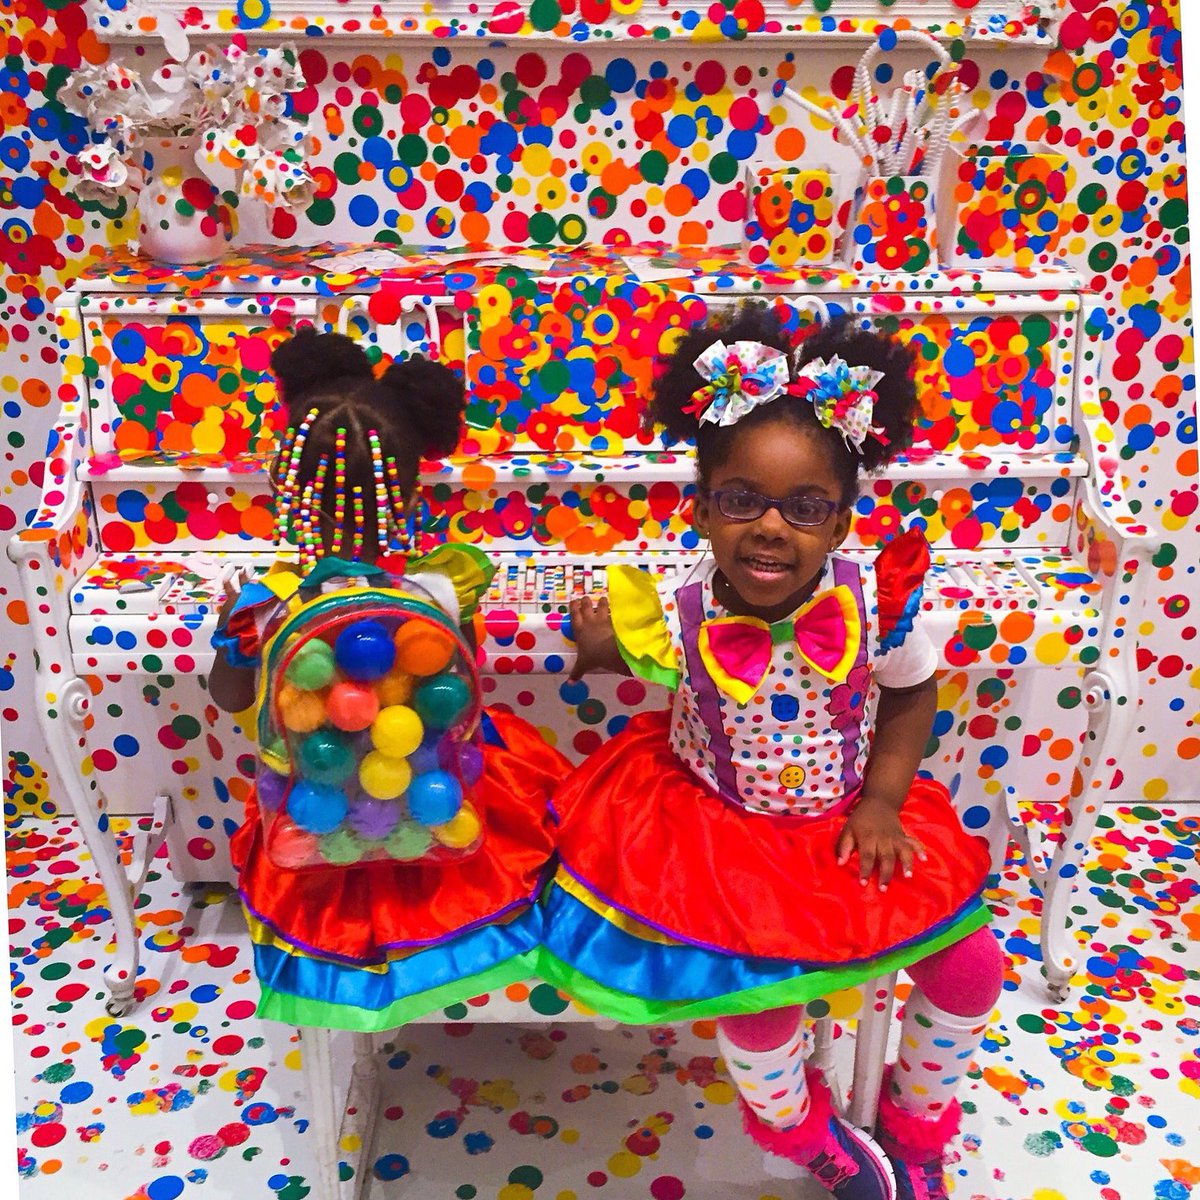 Two young girls in bright polka dot clothes in bright polka dot exhbition